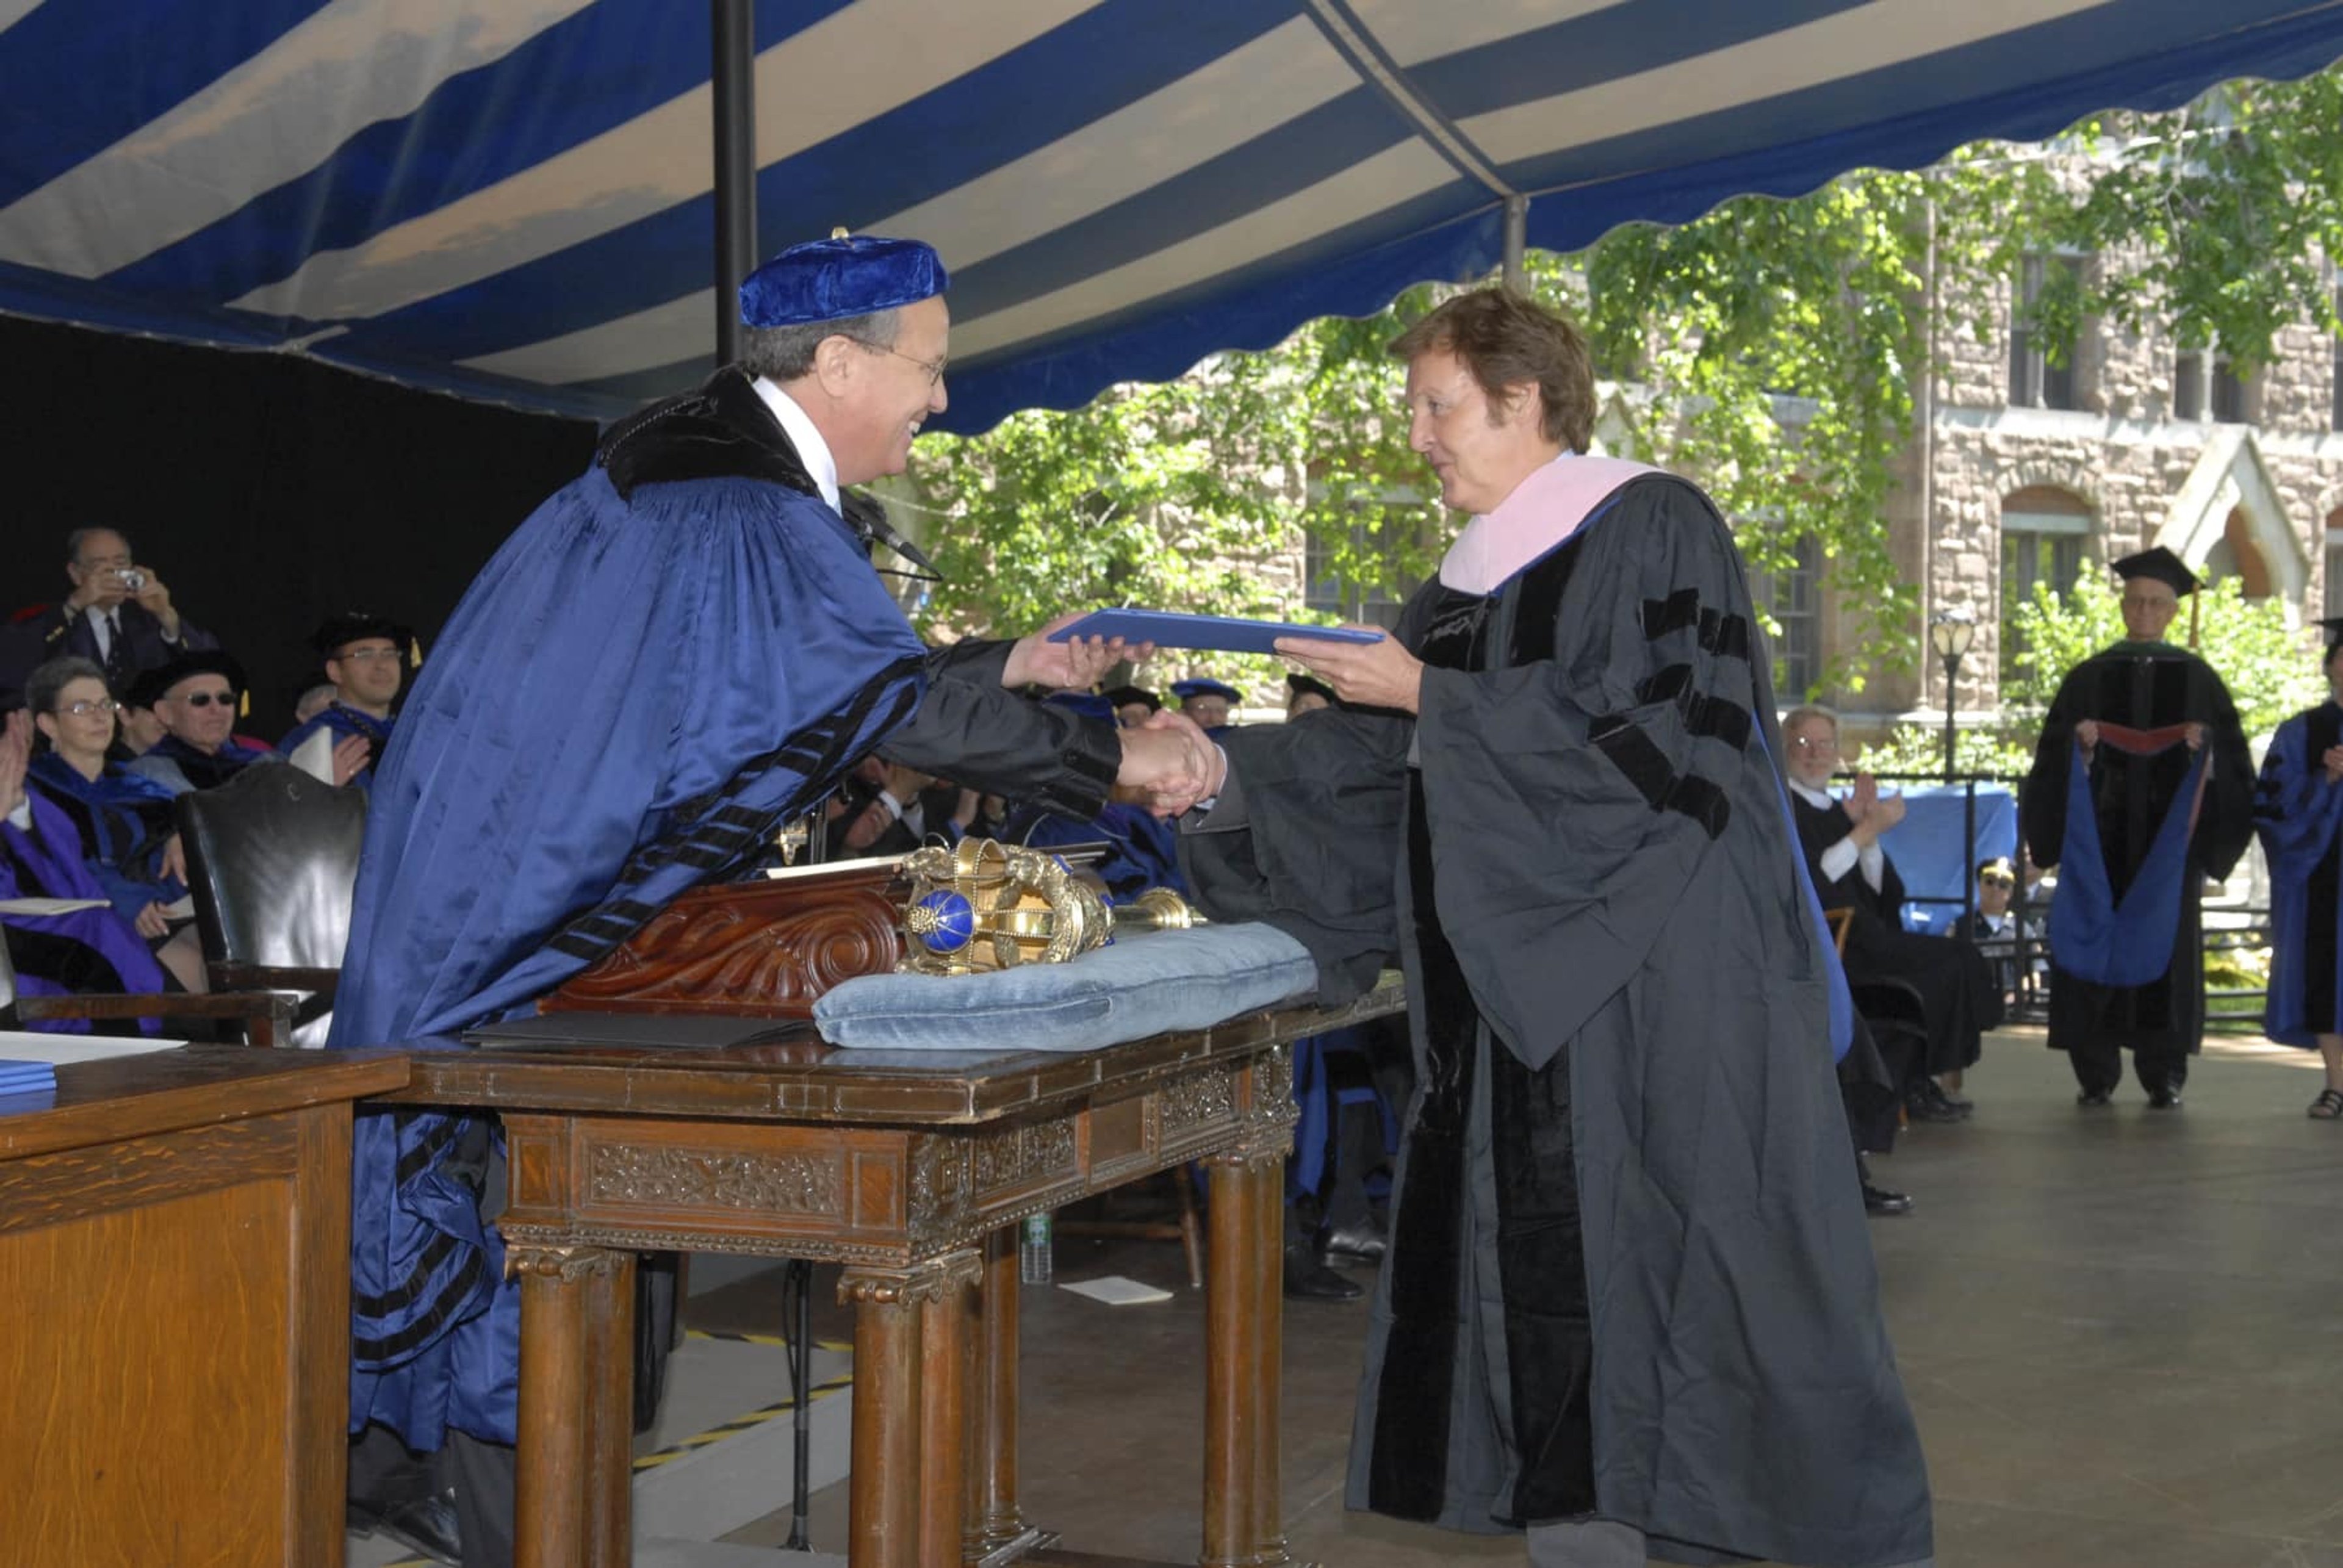 Paul wearing a Yale University gown, receiving his honorary degree